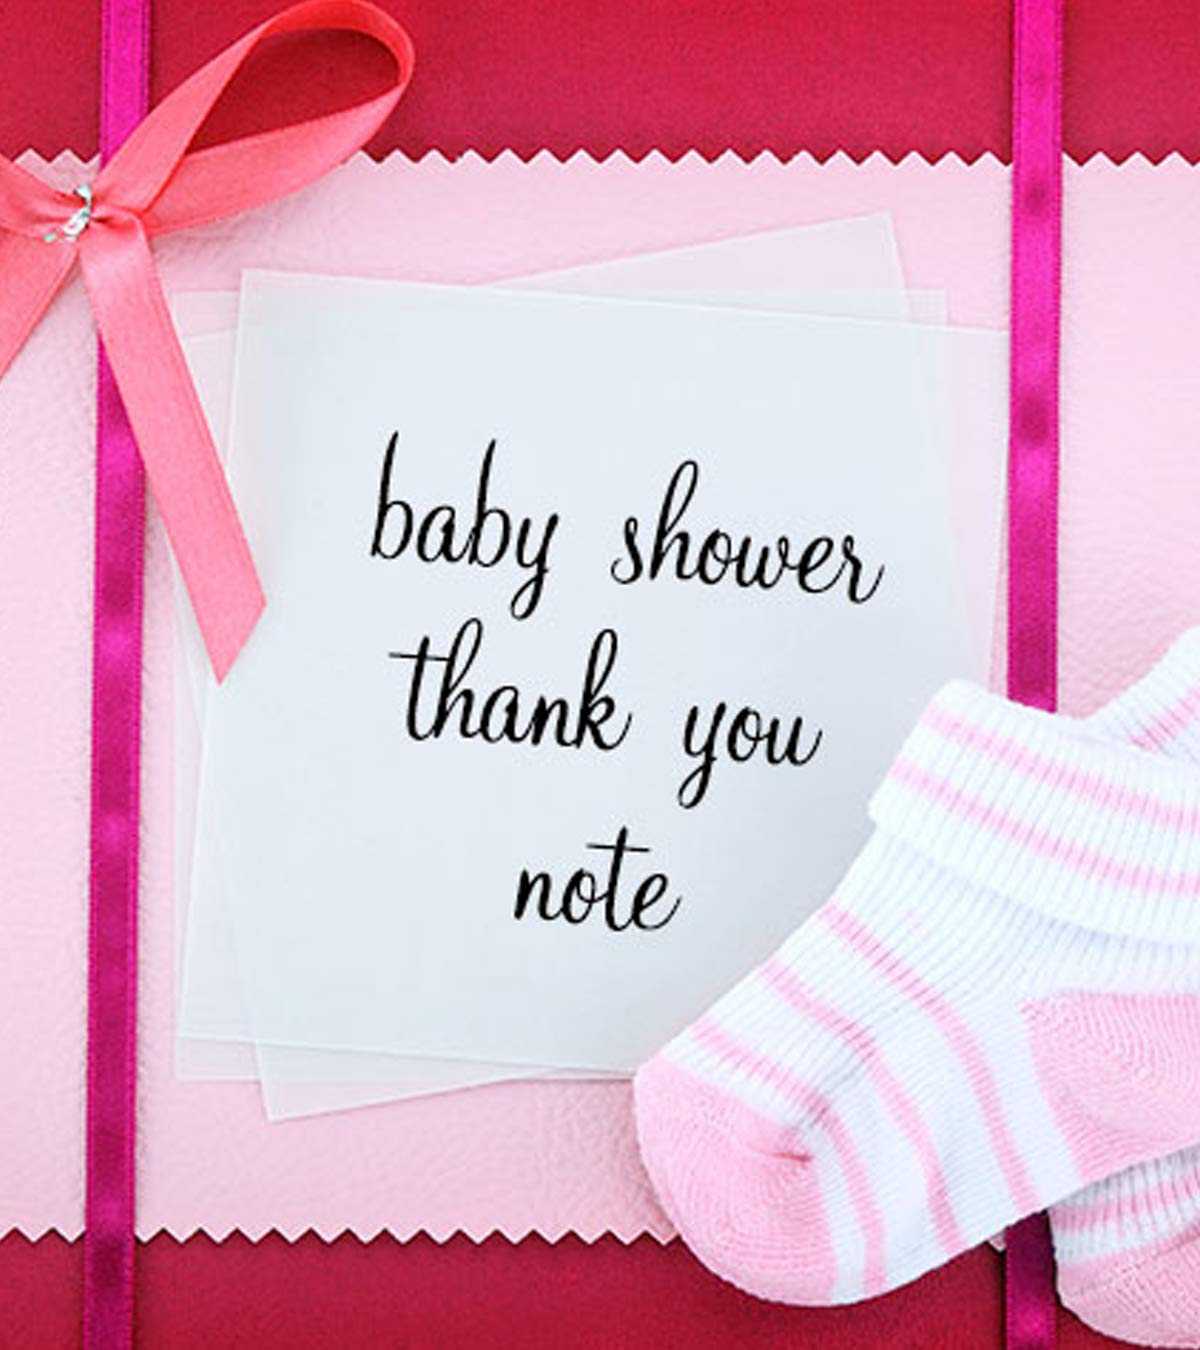 Baby Shower Thank You Notes: What To Write In A Thank You Card Intended For Template For Baby Shower Thank You Cards